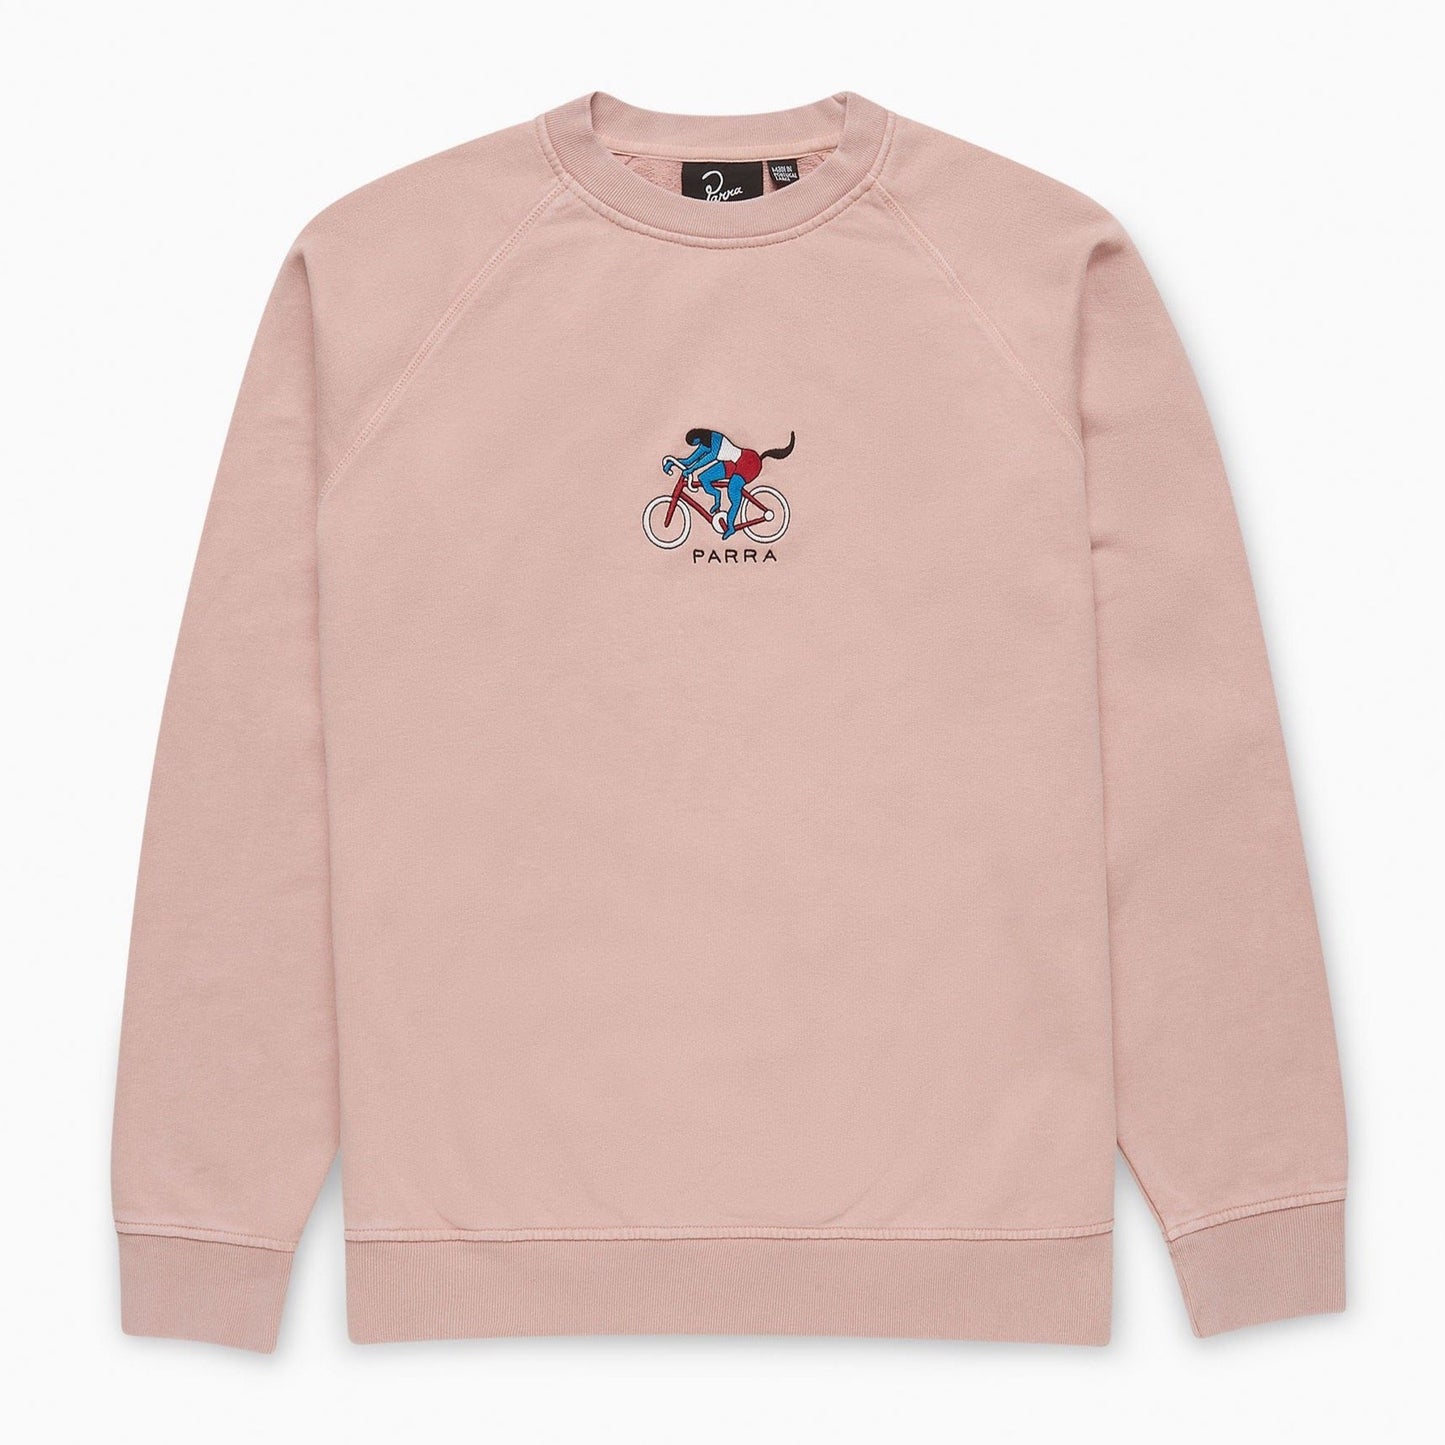 By Parra The Chase Crew Sweatshirt